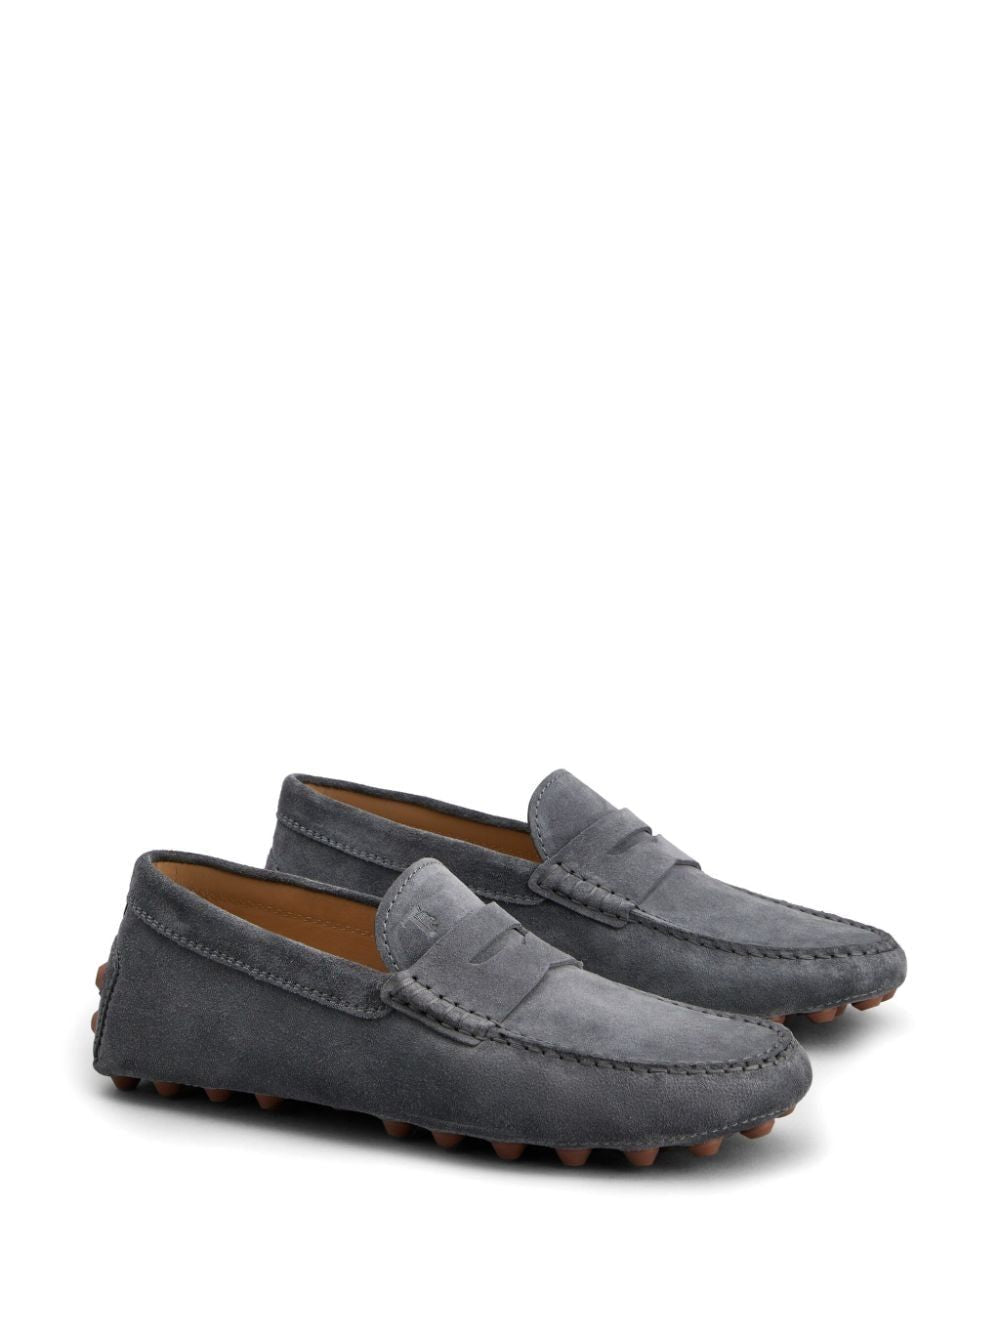 TOD'S Grey Suede Loafers with Rubber Studs and Front Penny Bar for Men - SS24